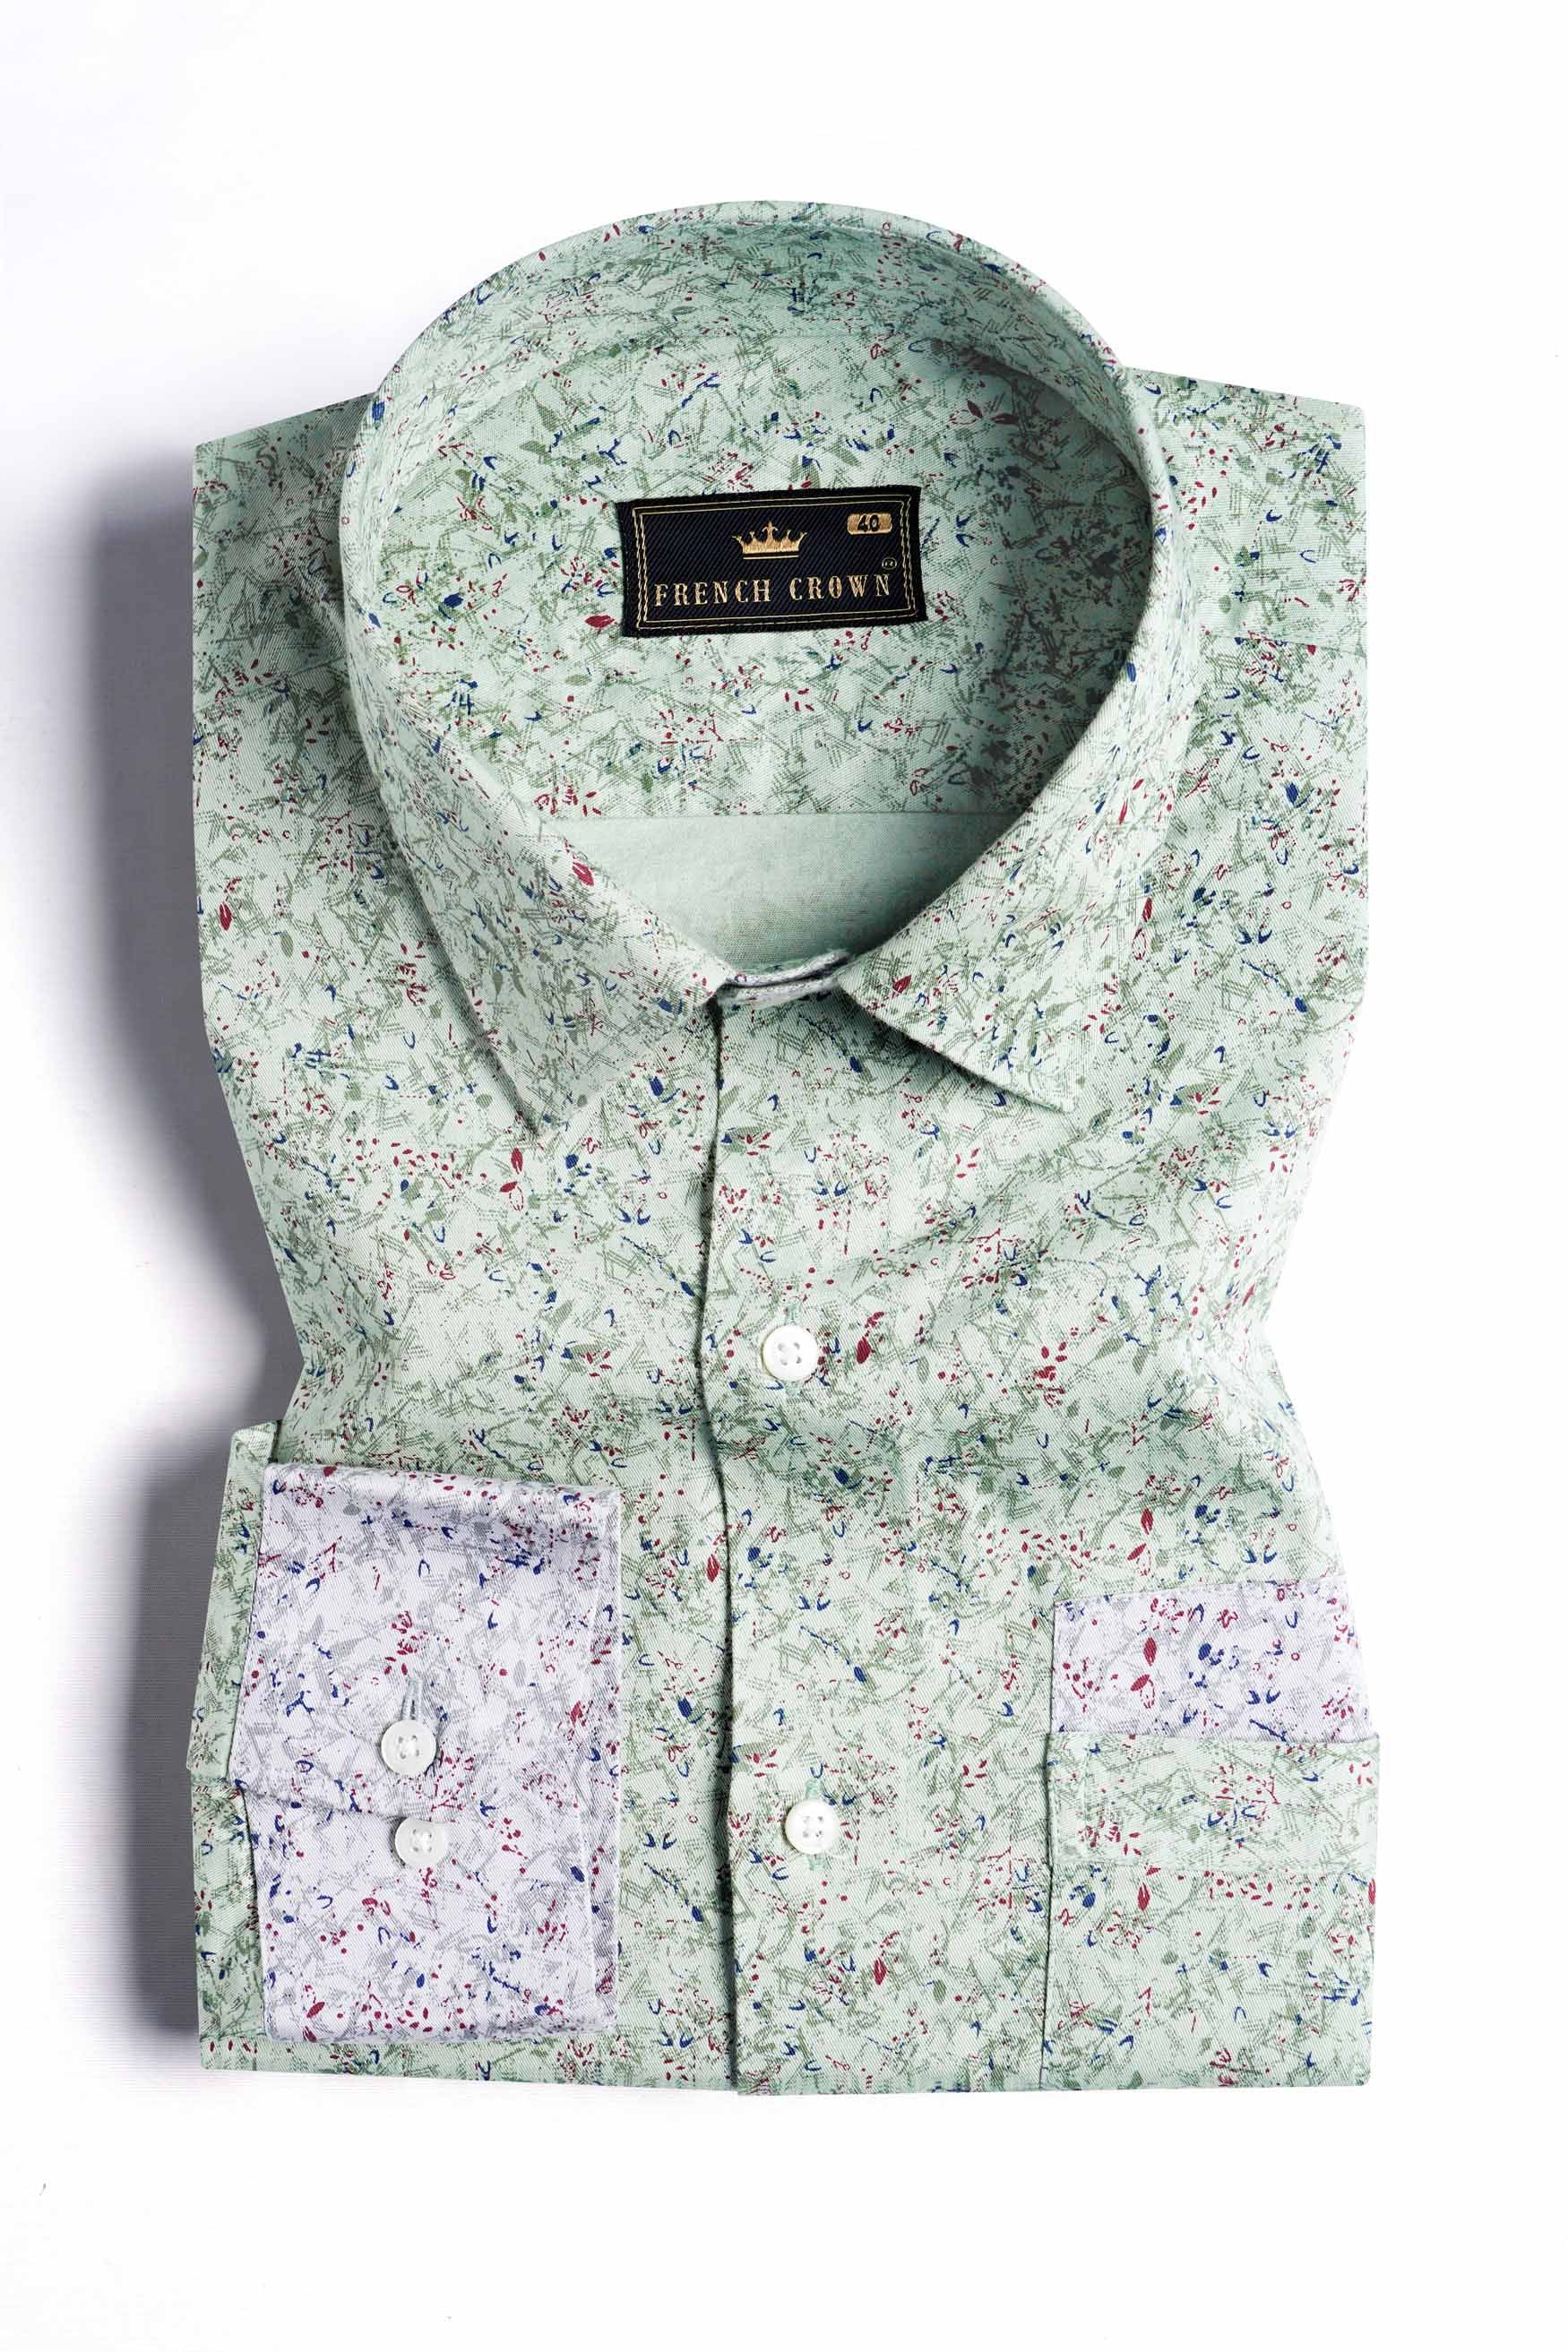 Clay Ash Green and Fiord Blue Printed with Bear Embroidered Twill Premium Cotton Designer Shirt 8193-P116-E294-38, 8193-P116-E294-H-38, 8193-P116-E294-39, 8193-P116-E294-H-39, 8193-P116-E294-40, 8193-P116-E294-H-40, 8193-P116-E294-42, 8193-P116-E294-H-42, 8193-P116-E294-44, 8193-P116-E294-H-44, 8193-P116-E294-46, 8193-P116-E294-H-46, 8193-P116-E294-48, 8193-P116-E294-H-48, 8193-P116-E294-50, 8193-P116-E294-H-50, 8193-P116-E294-52, 8193-P116-E294-H-52